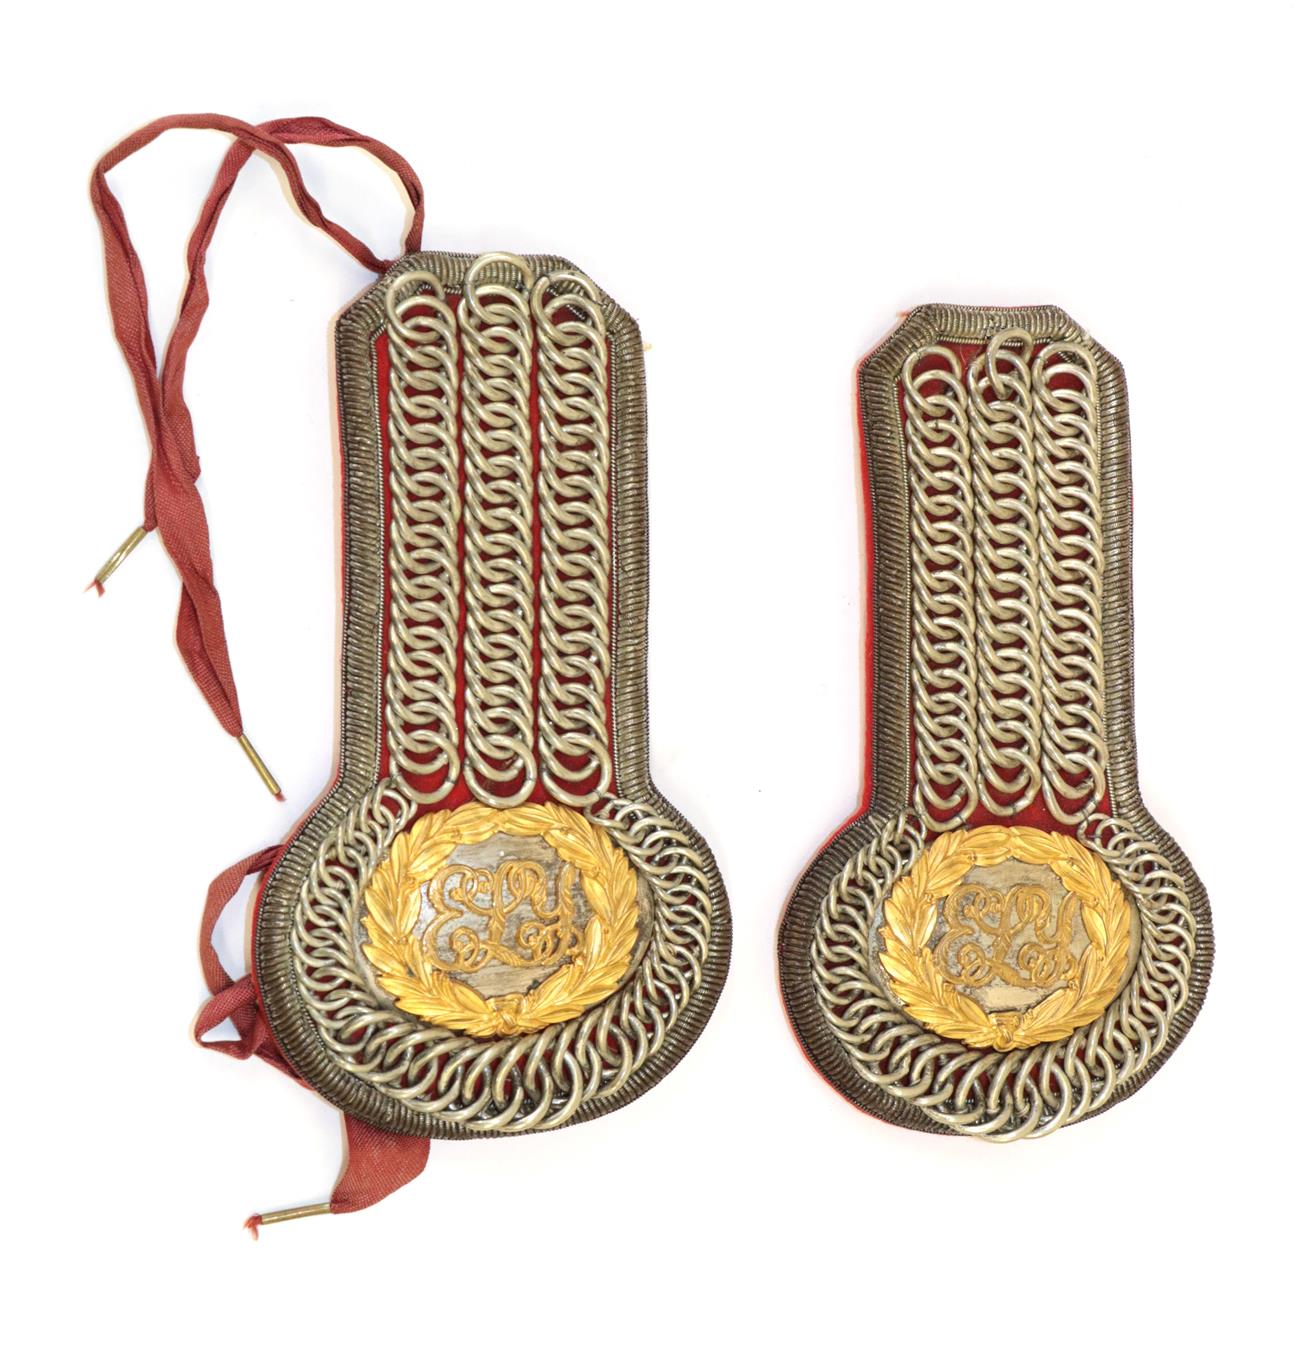 Lot 81 - A Pair of Victorian Officer's Chained Epaulettes for the East Lothian Yeomanry, set with oval white